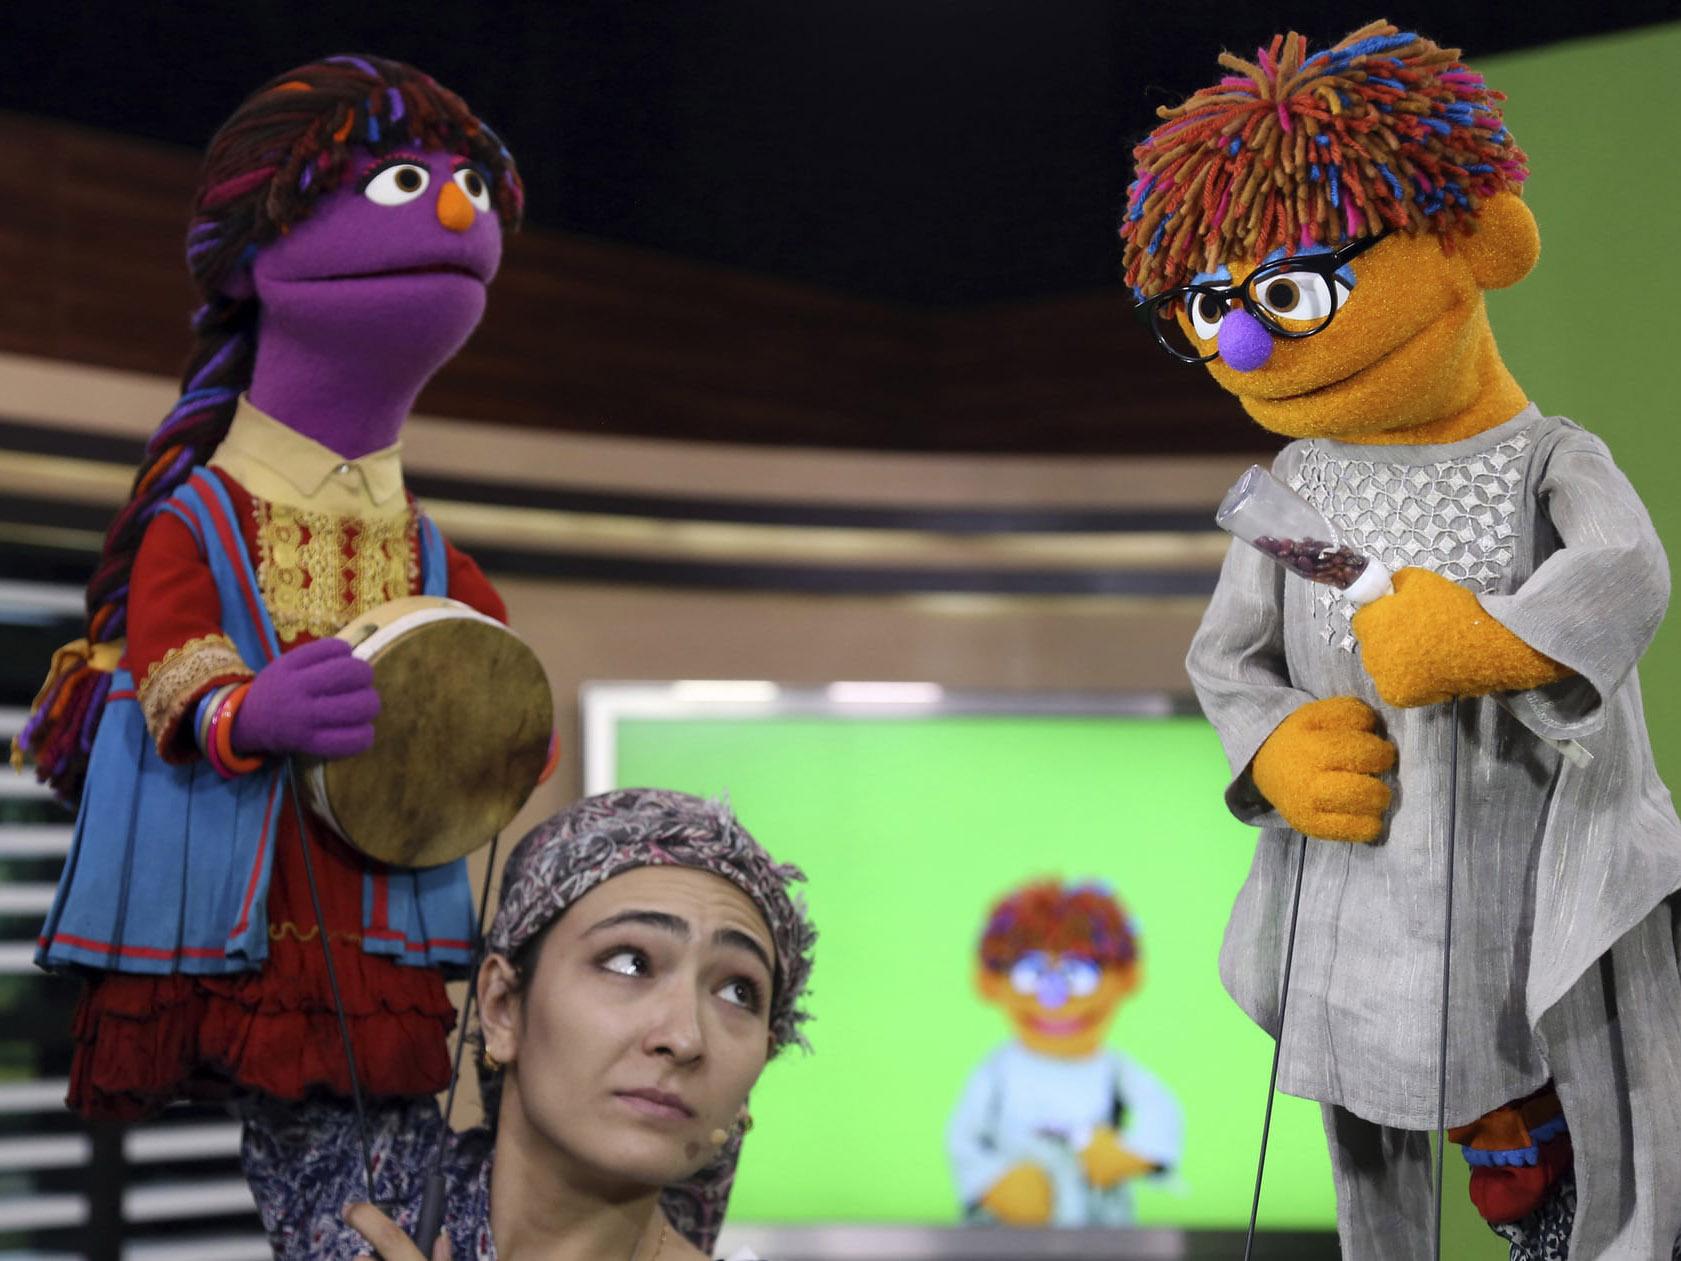 An Afghan puppeteer with the two new Sesame Garden characters: Zari, left, and Zeerak